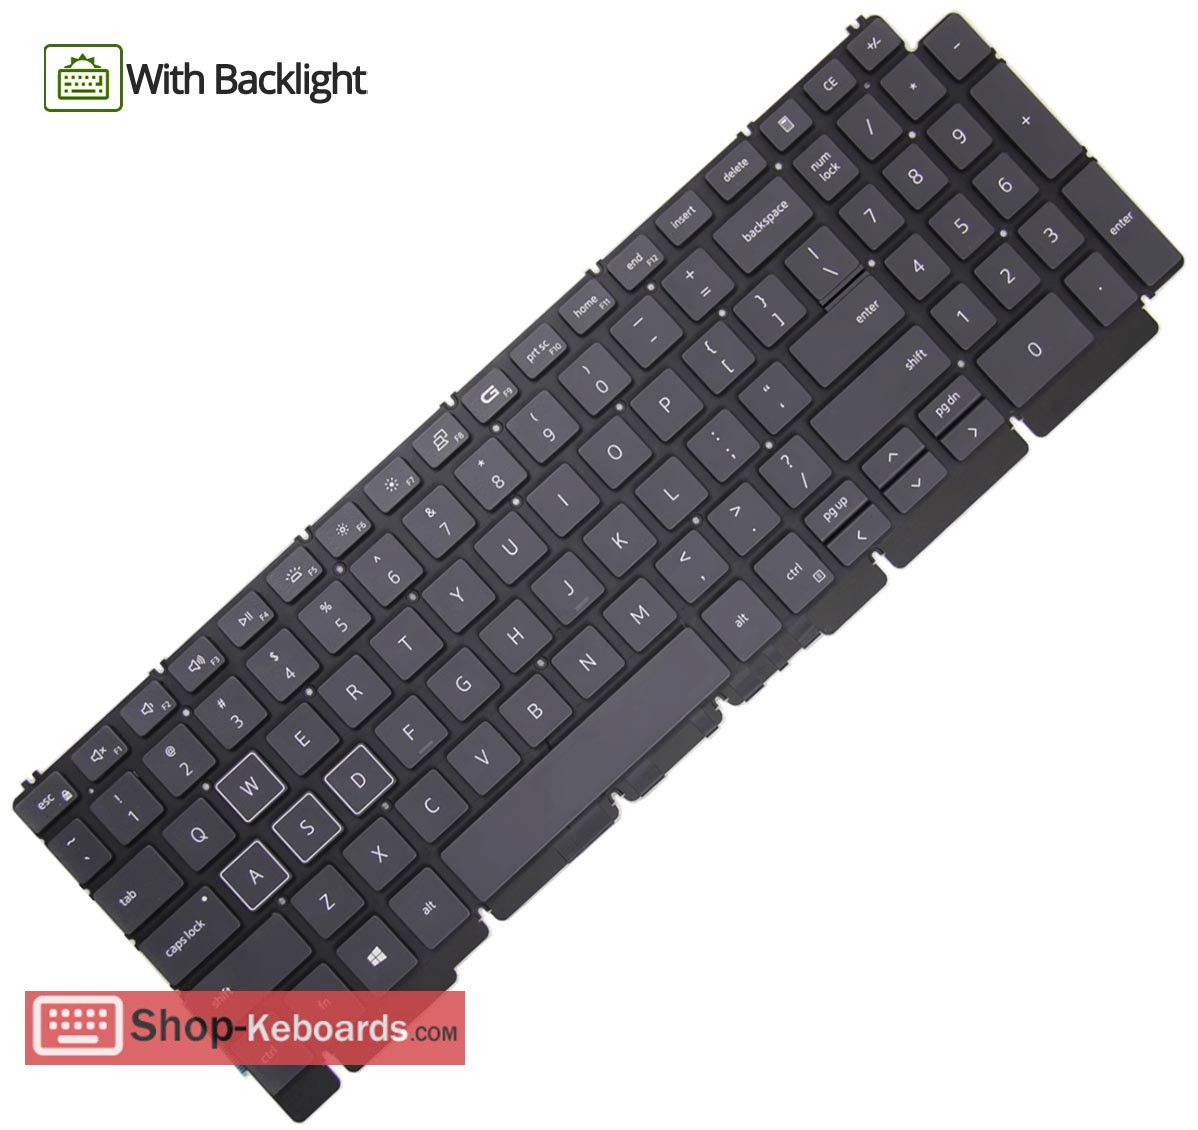 Dell G15 RYZEN EDITION Keyboard replacement